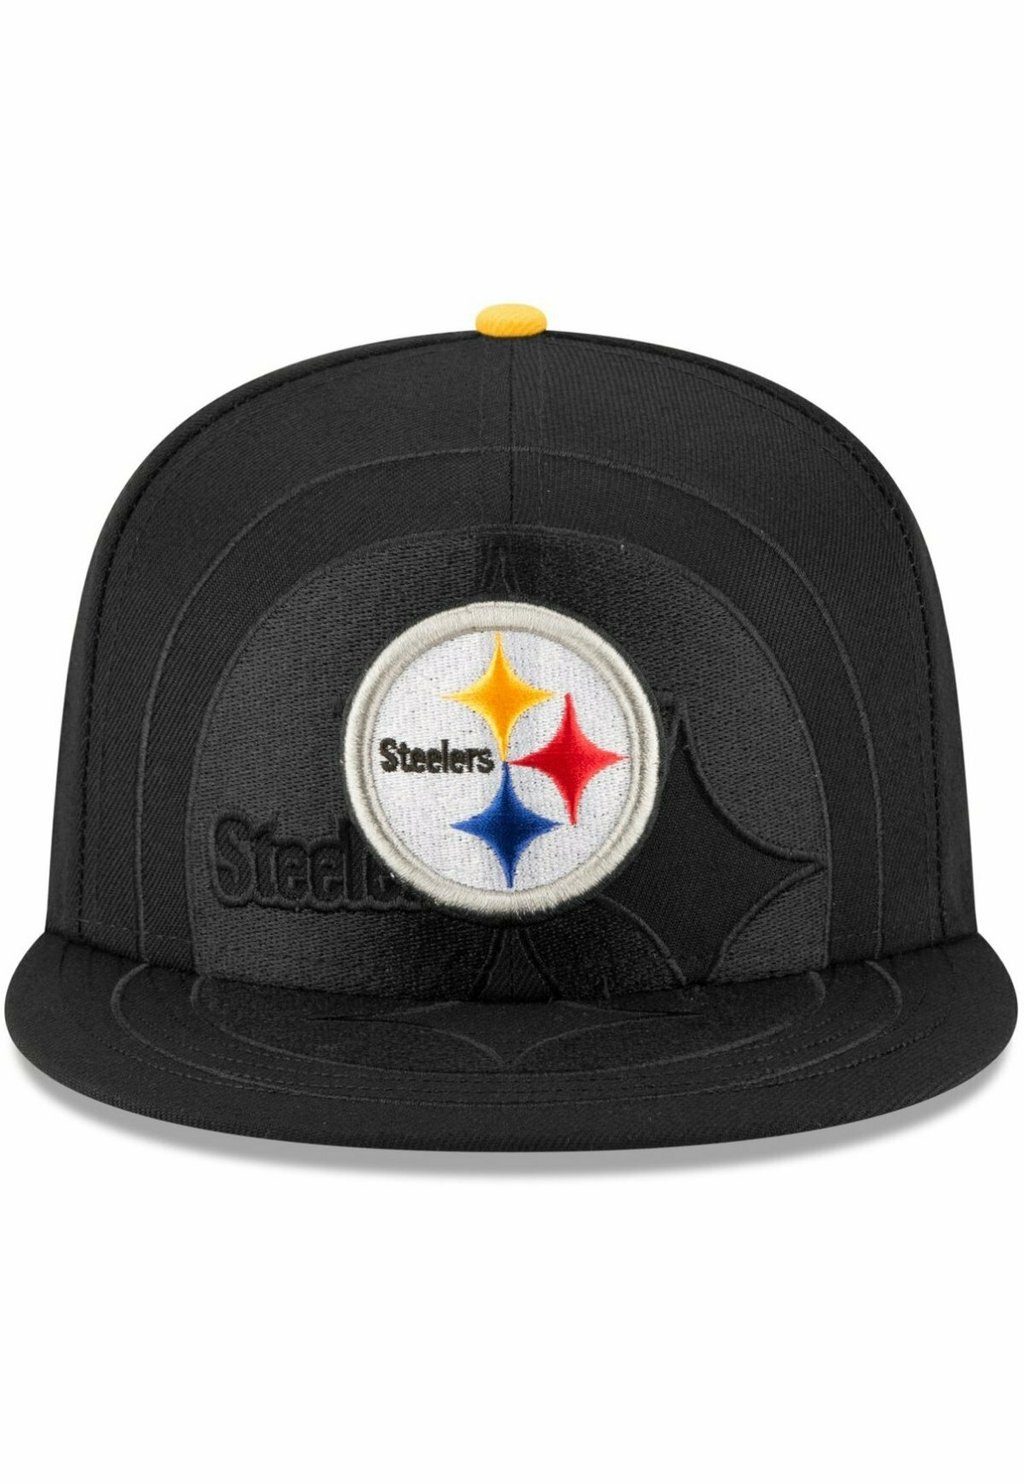 Бейсболка 59FIFTY SPILL LOGO NFL TEAMS New Era, цвет pittsburgh steelers new steelers women s fans rugby jerseys sports fans wear james conner american football pittsburgh jersey stitched t shirts